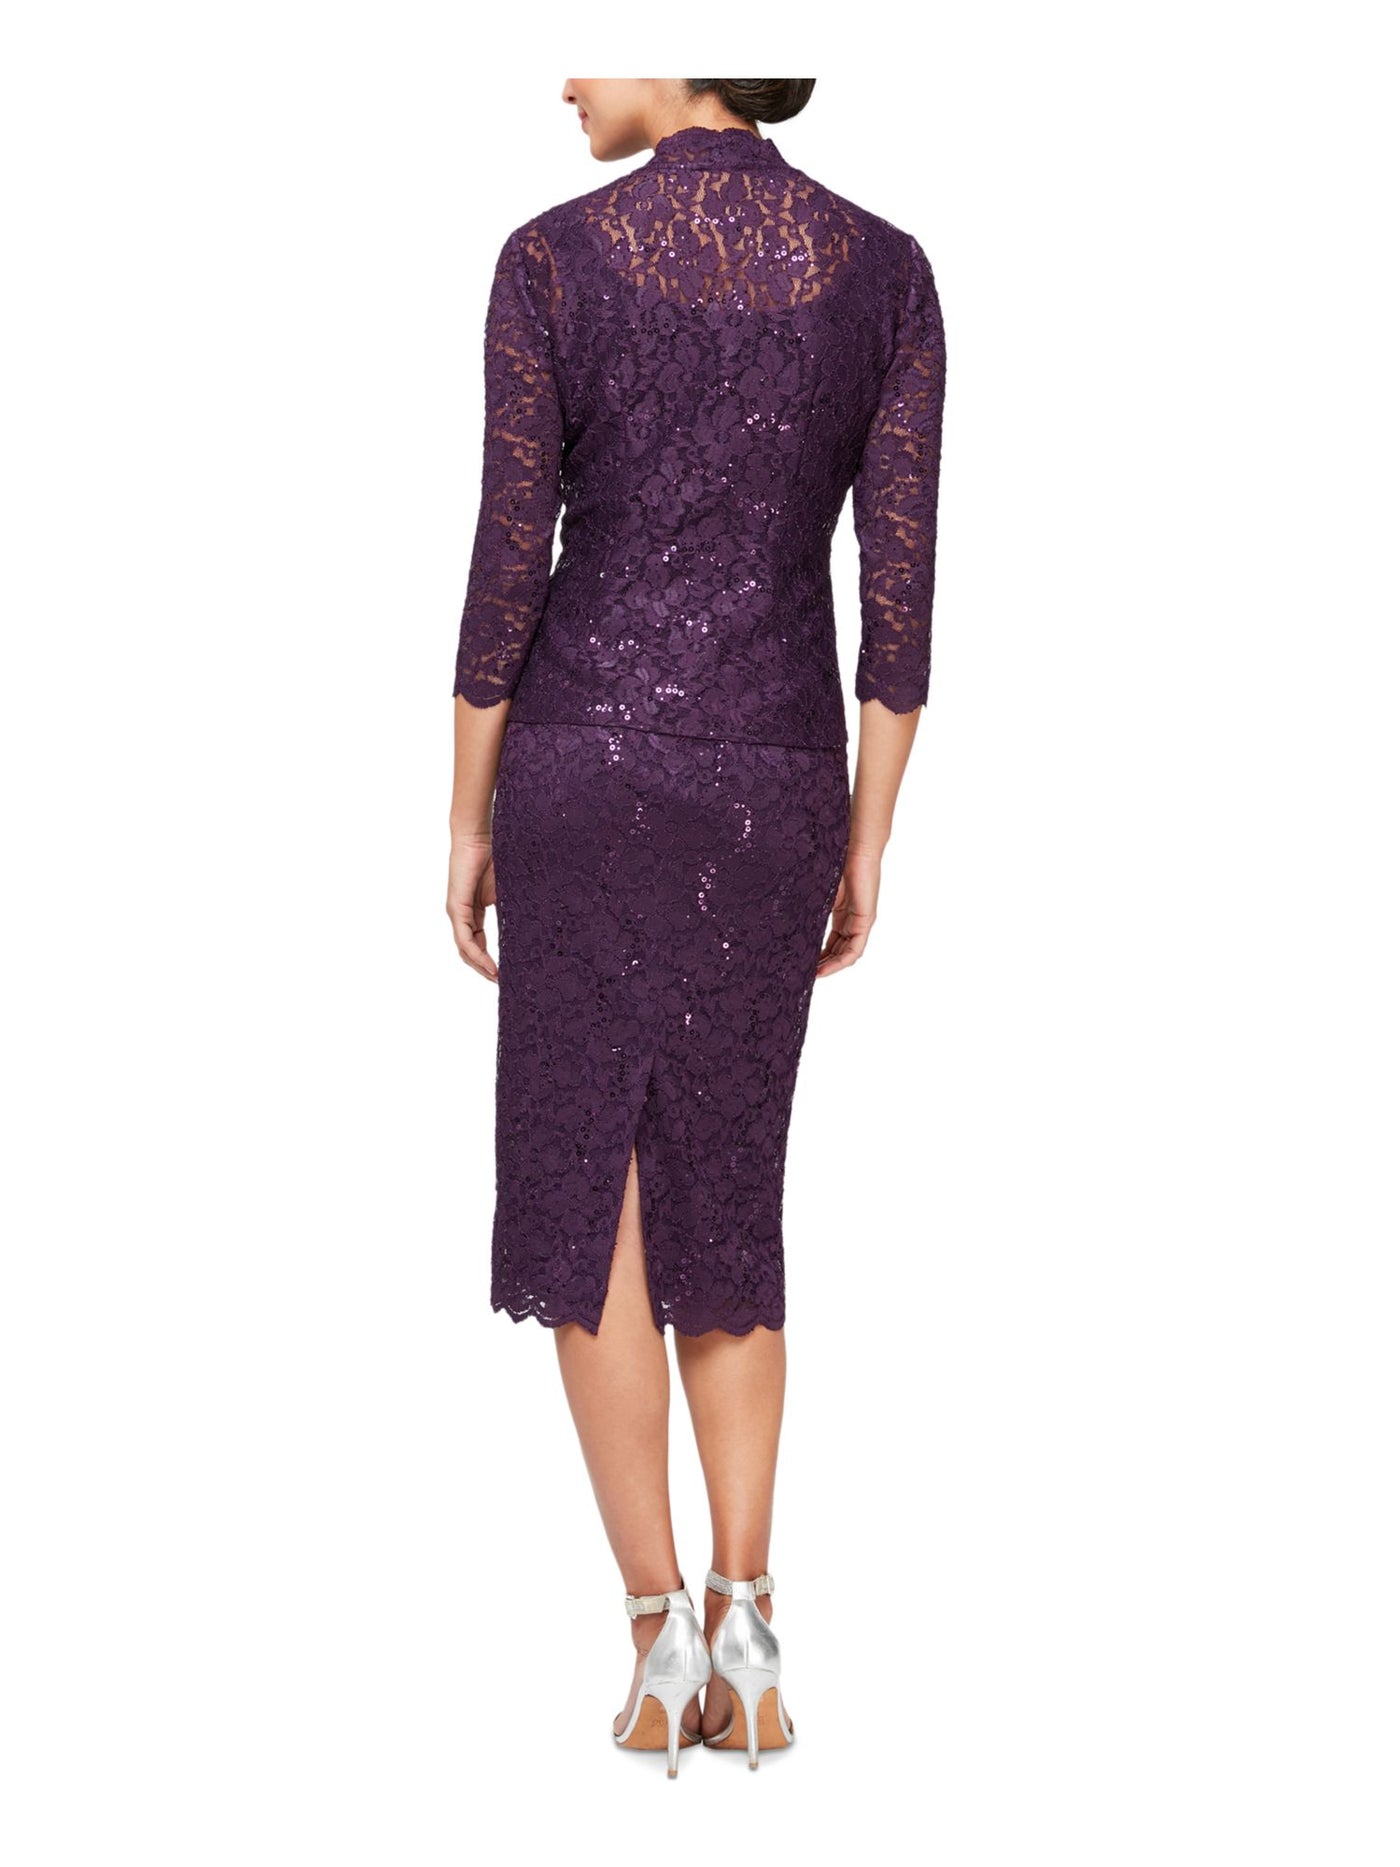 SLNY Womens Purple Sequined Zippered Lined Slit Scalloped Floral Sleeveless Scoop Neck Below The Knee Evening Sheath Dress Petites 8P